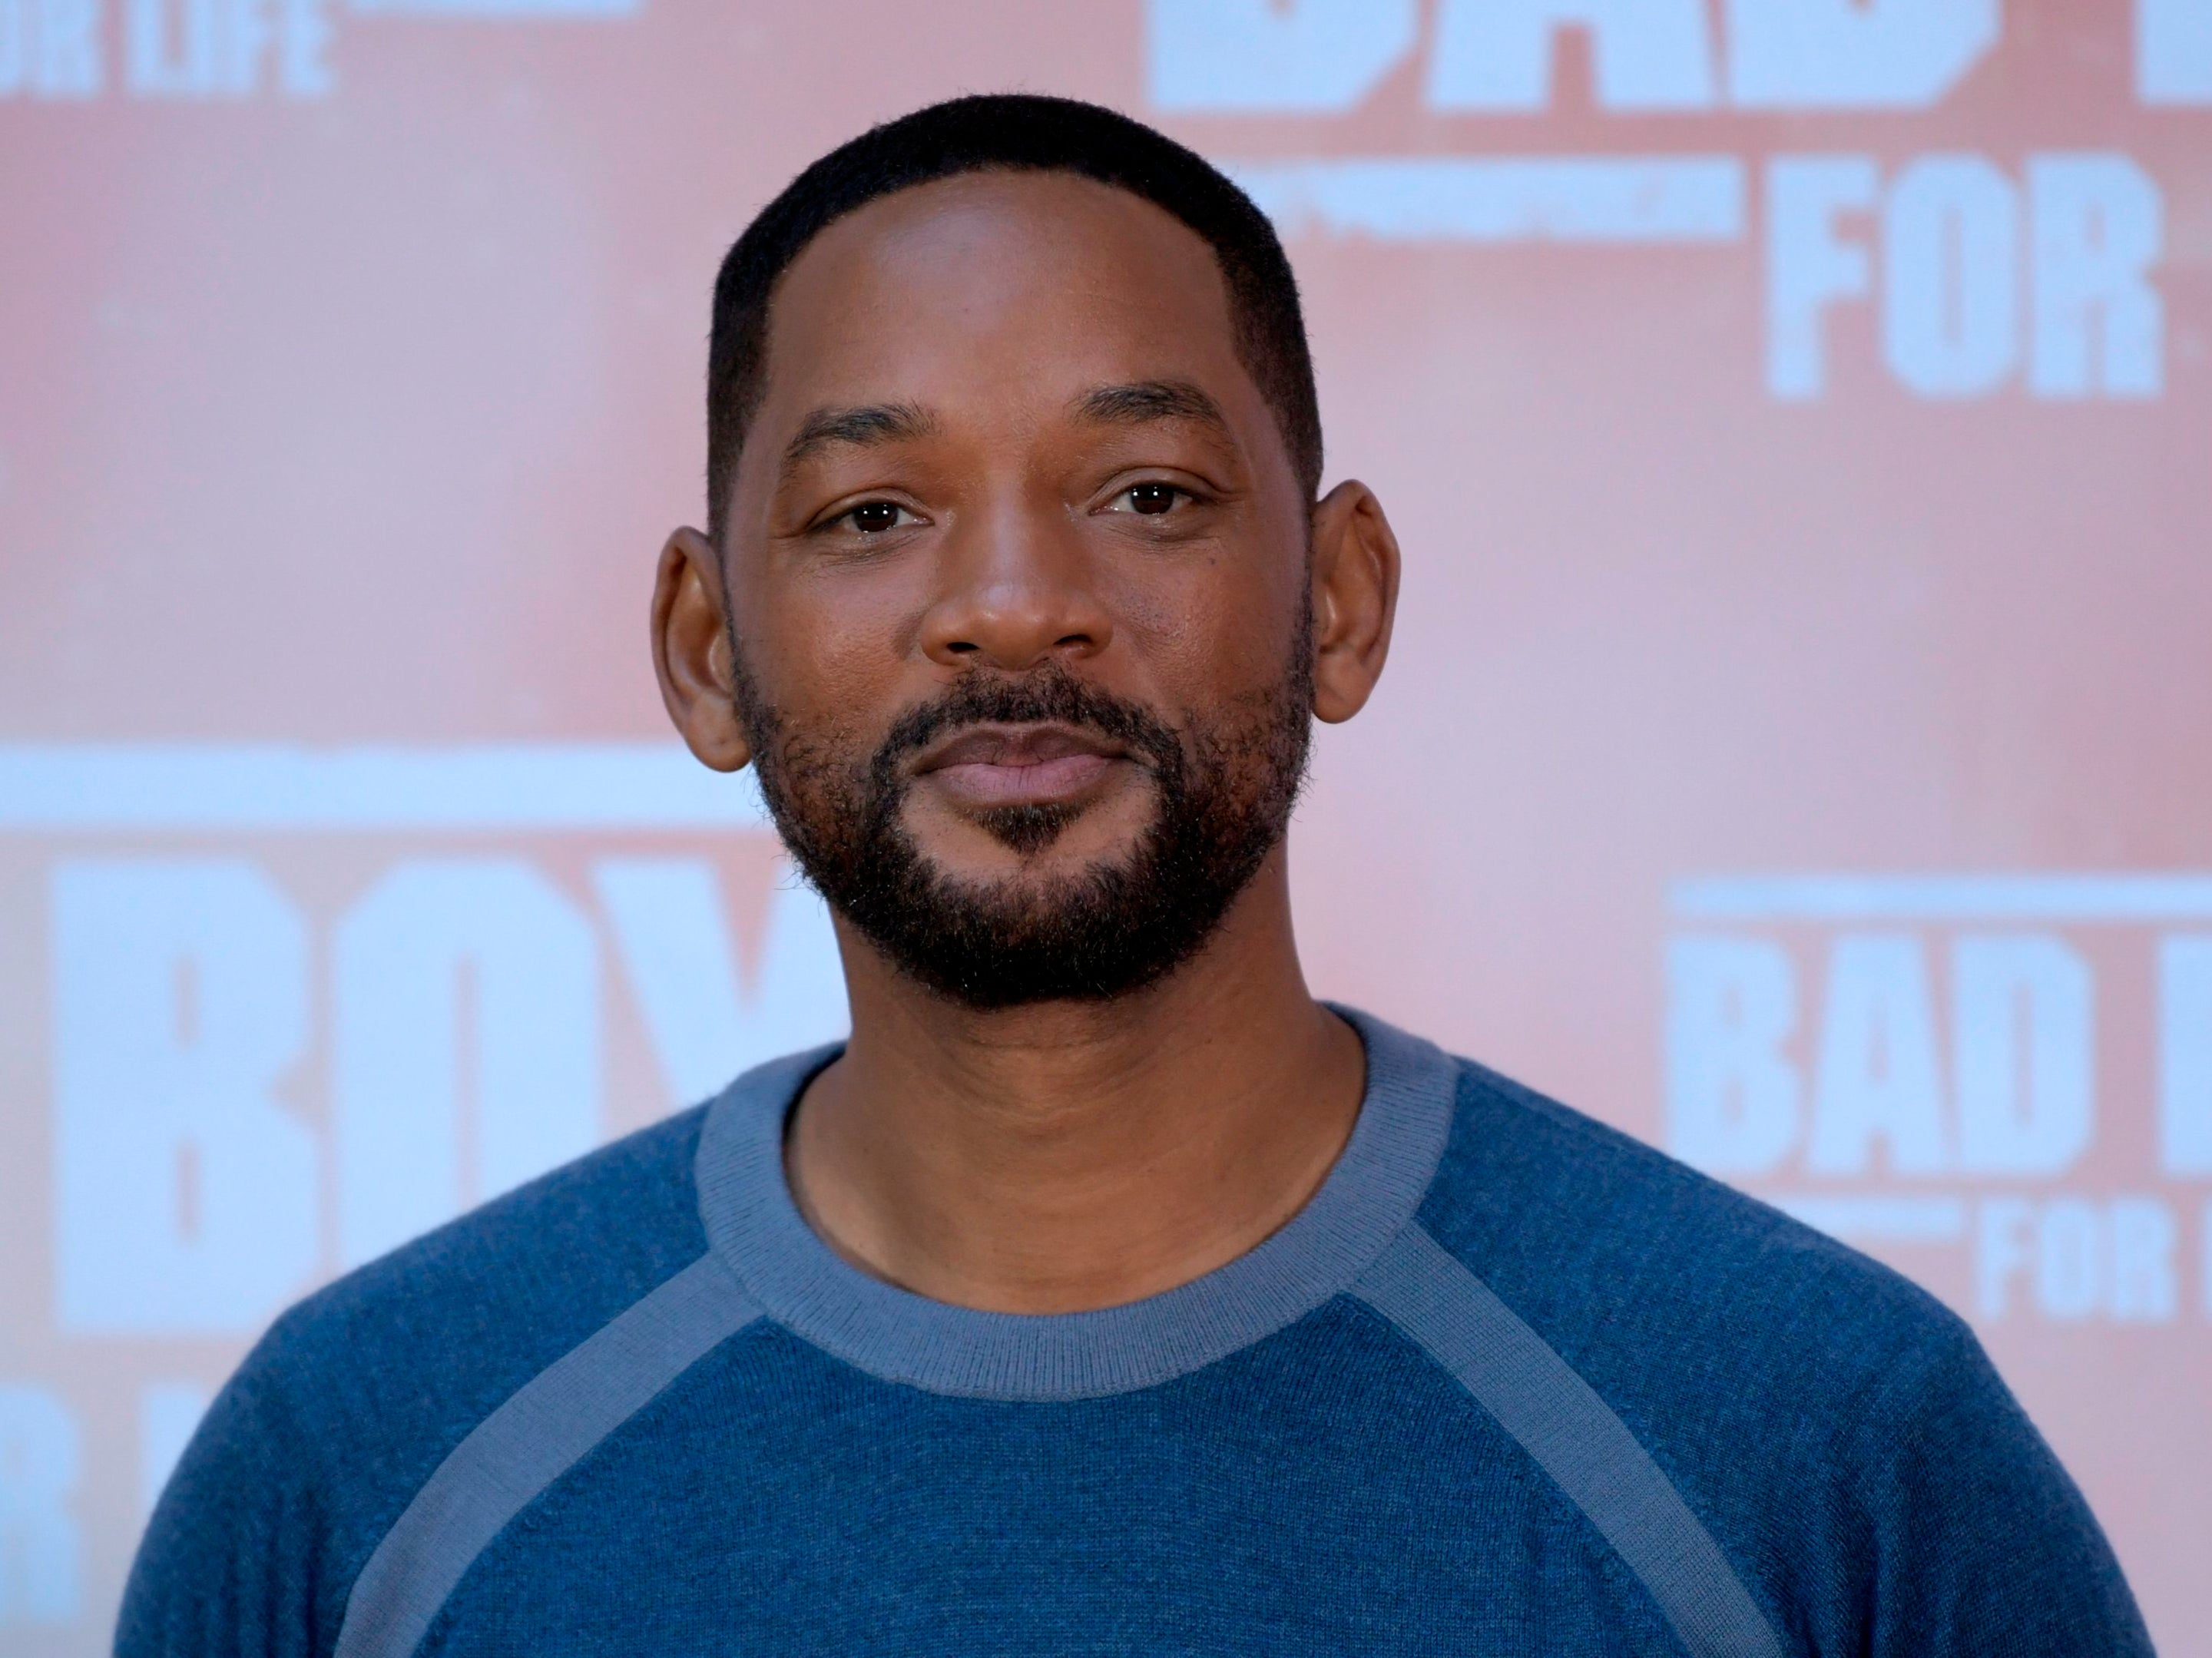 Will Smith poses at the ‘Bad Boys for Life’ launching photocall in Madrid on 8 January 2020